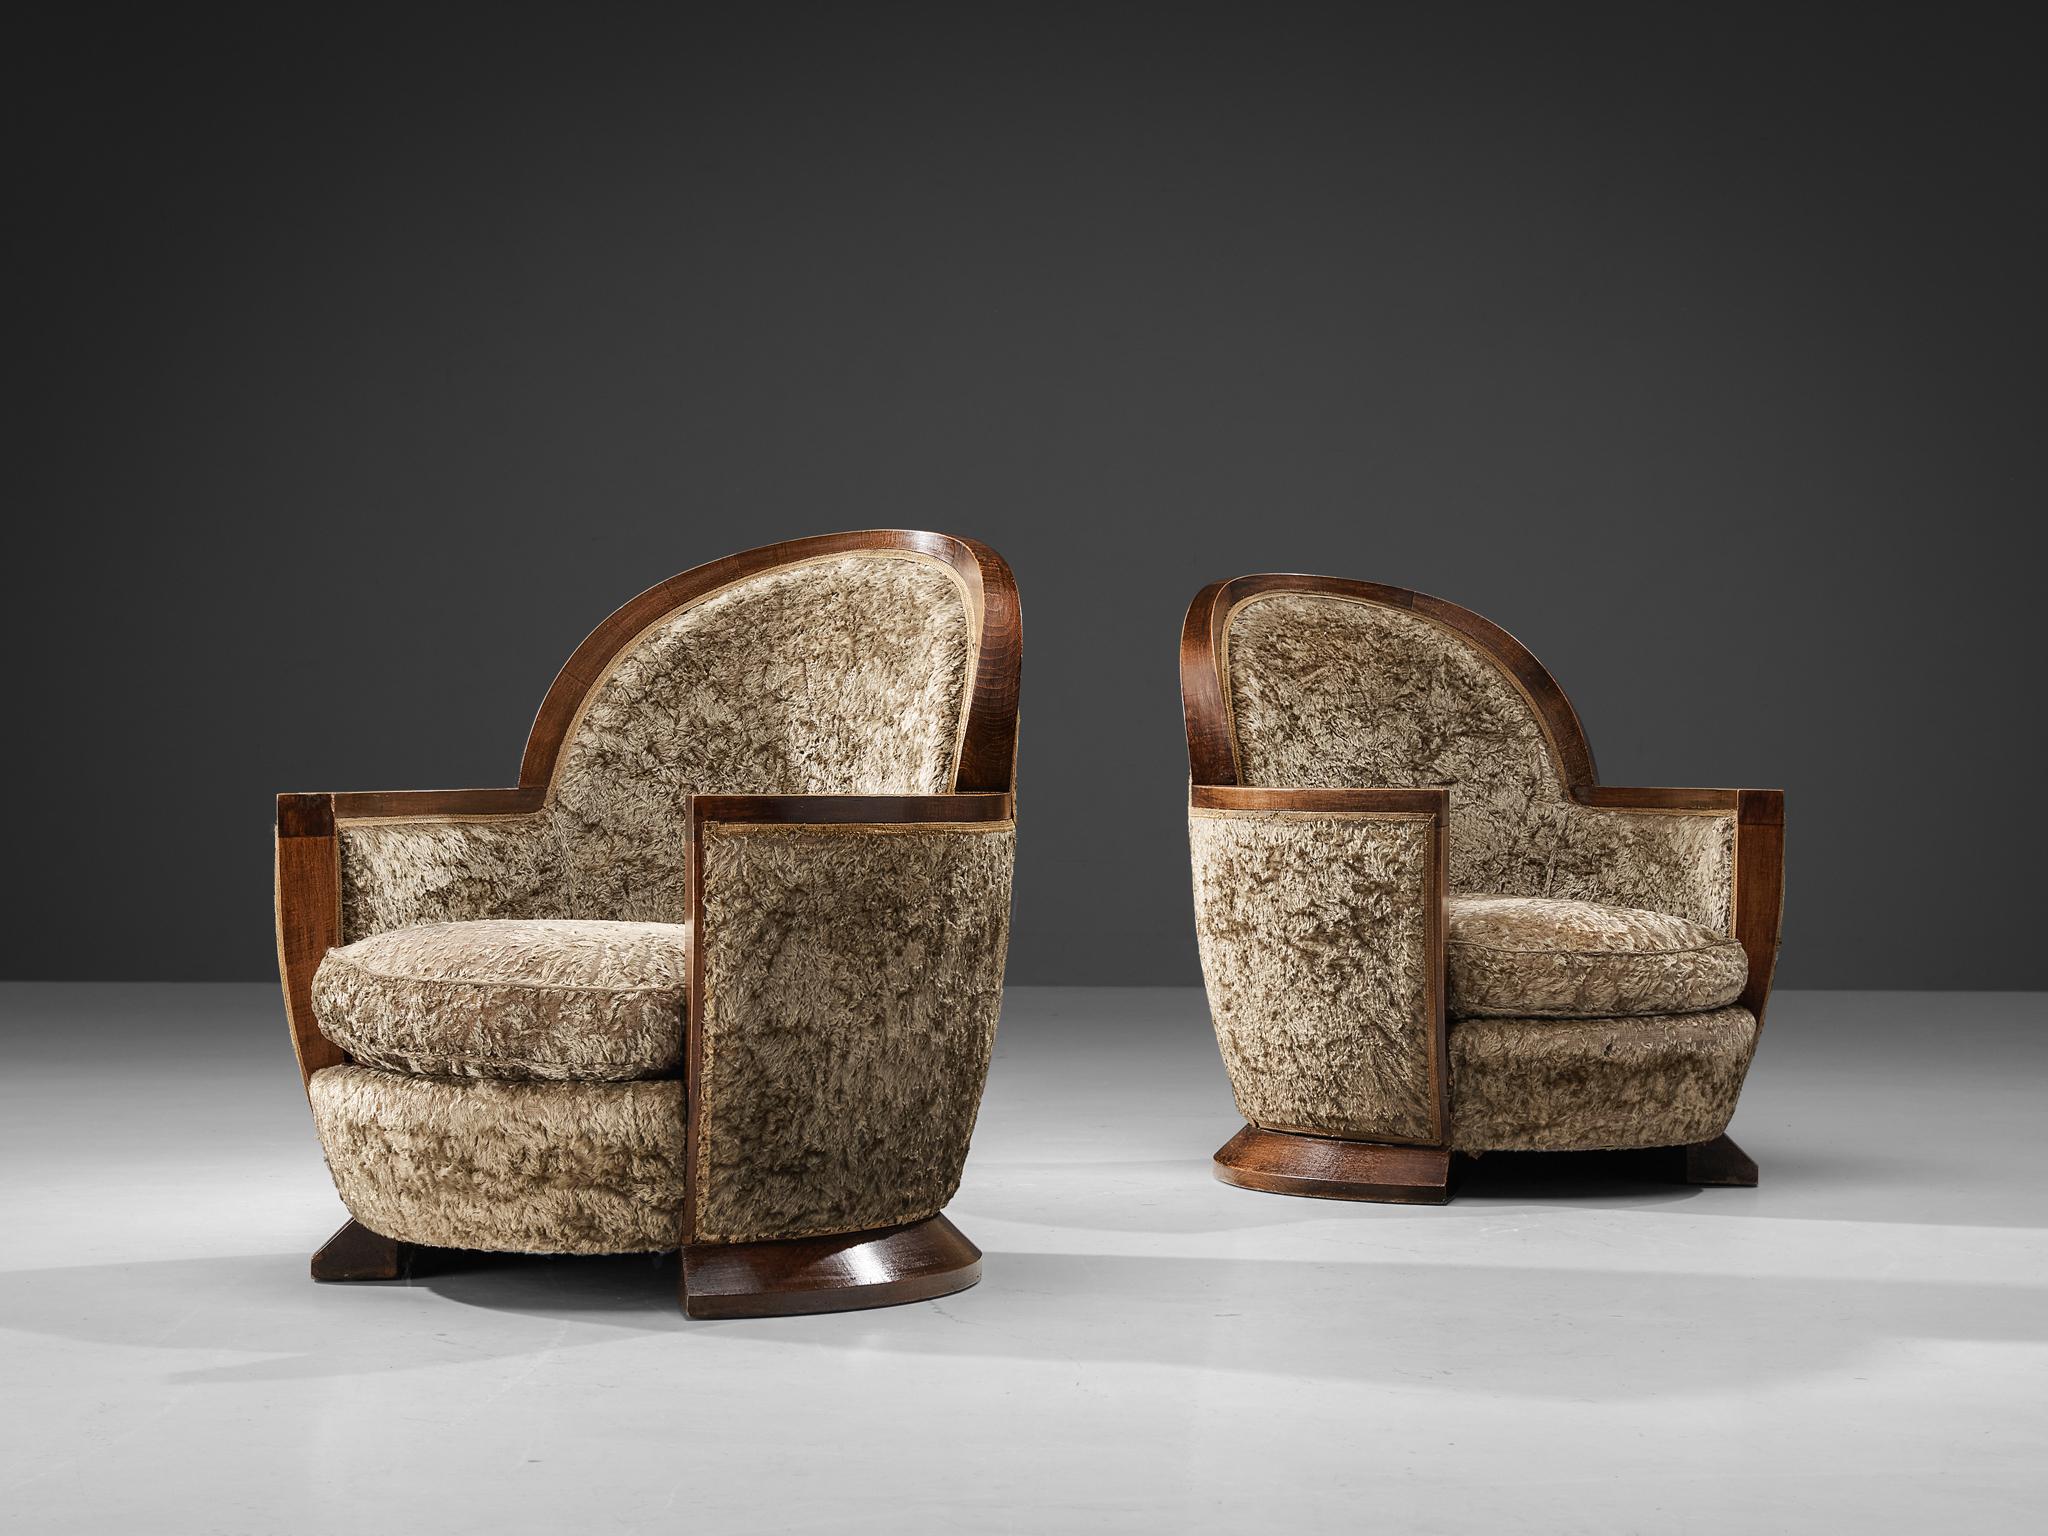 Gabriel Englinger, pair of lounge chairs, wood, long pile velvet upholstery, France, 1928.

This rare Art Deco armchair, designed by the esteemed designer Gabriel Englinger in 1928, epitomizes the luxury and sophistication of the era. The chair is